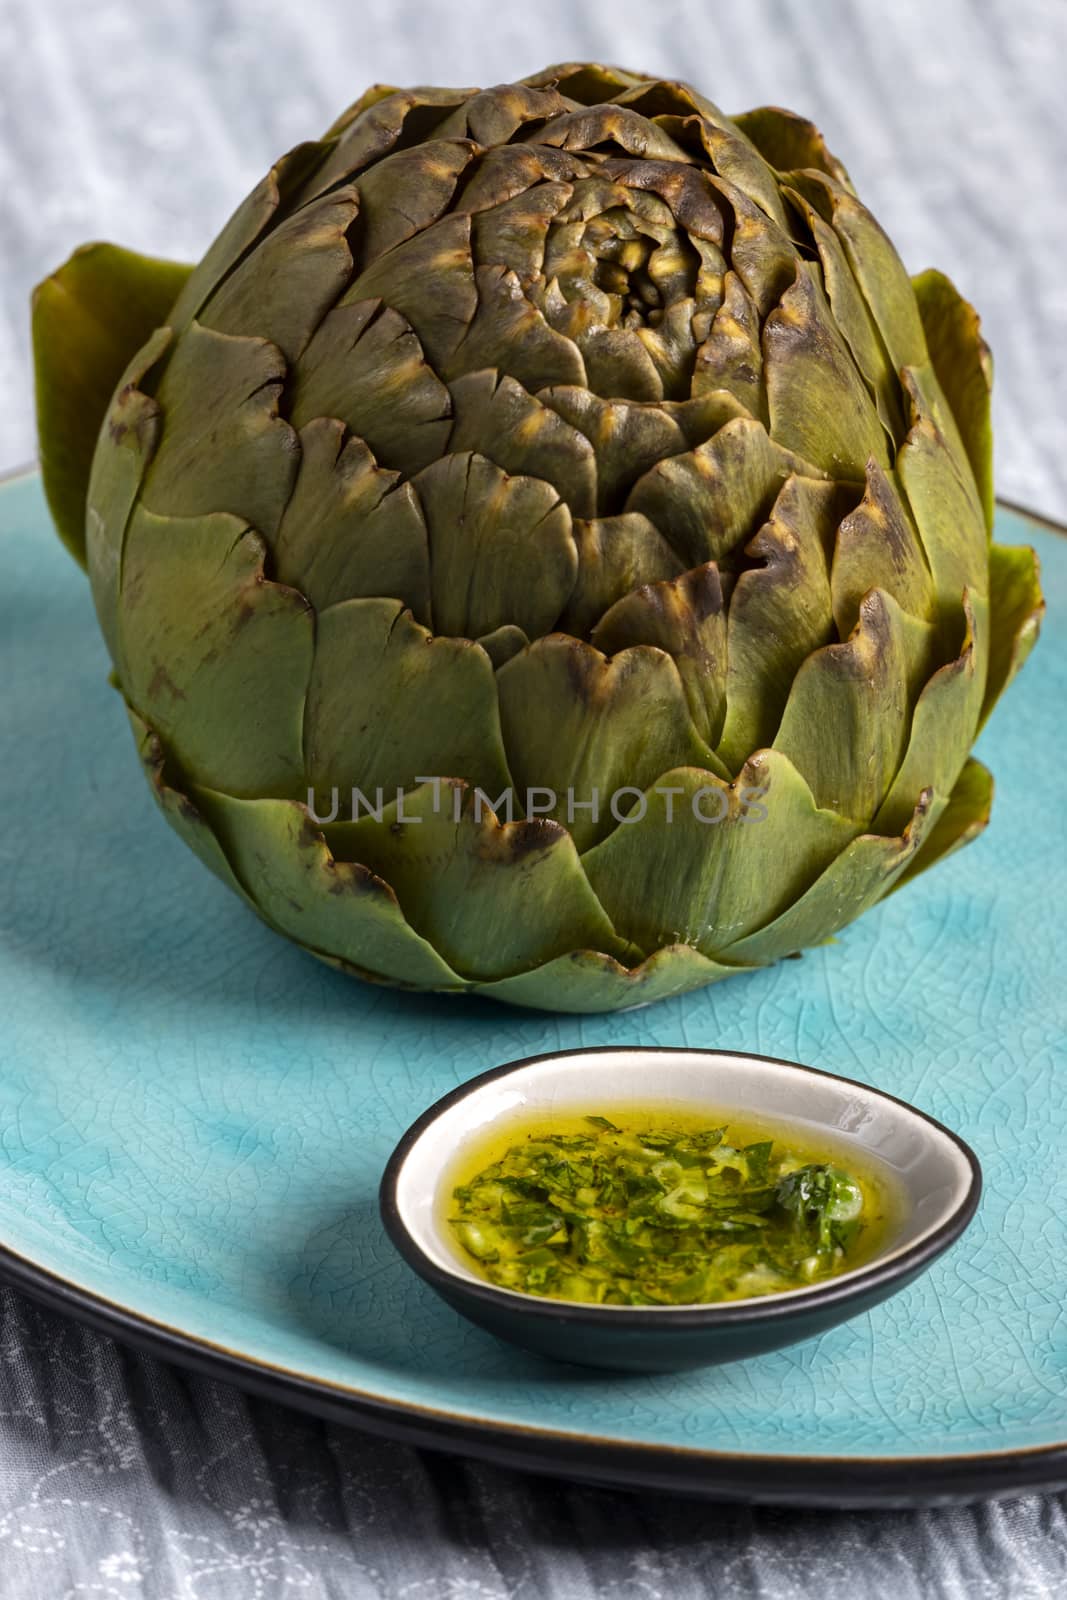 cooked artichoke on a blue plate by bernjuer